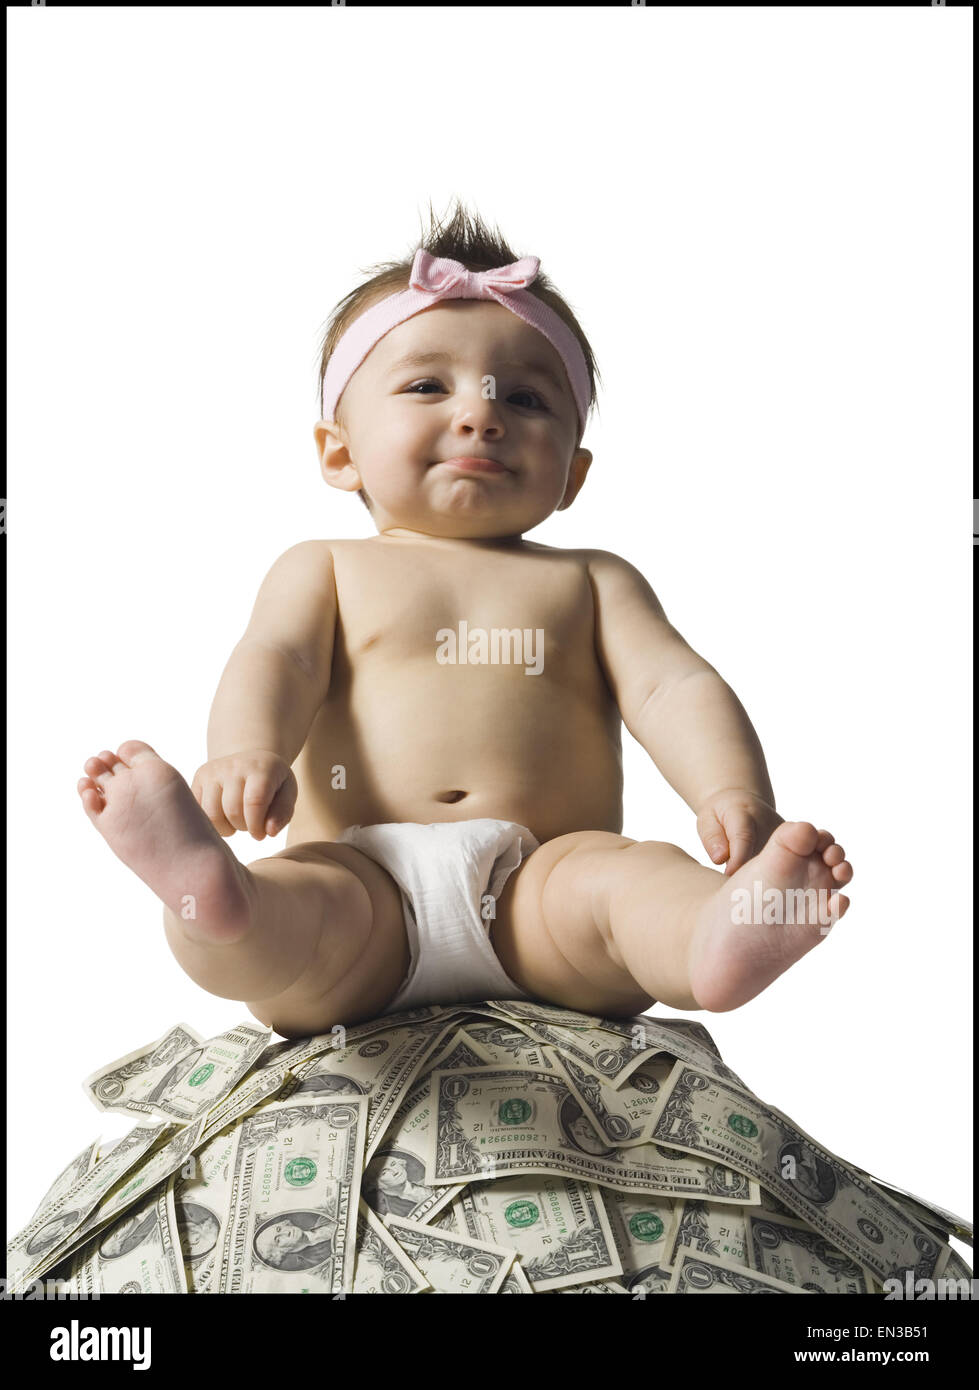 Baby girl sitting on pile of US currency Stock Photo